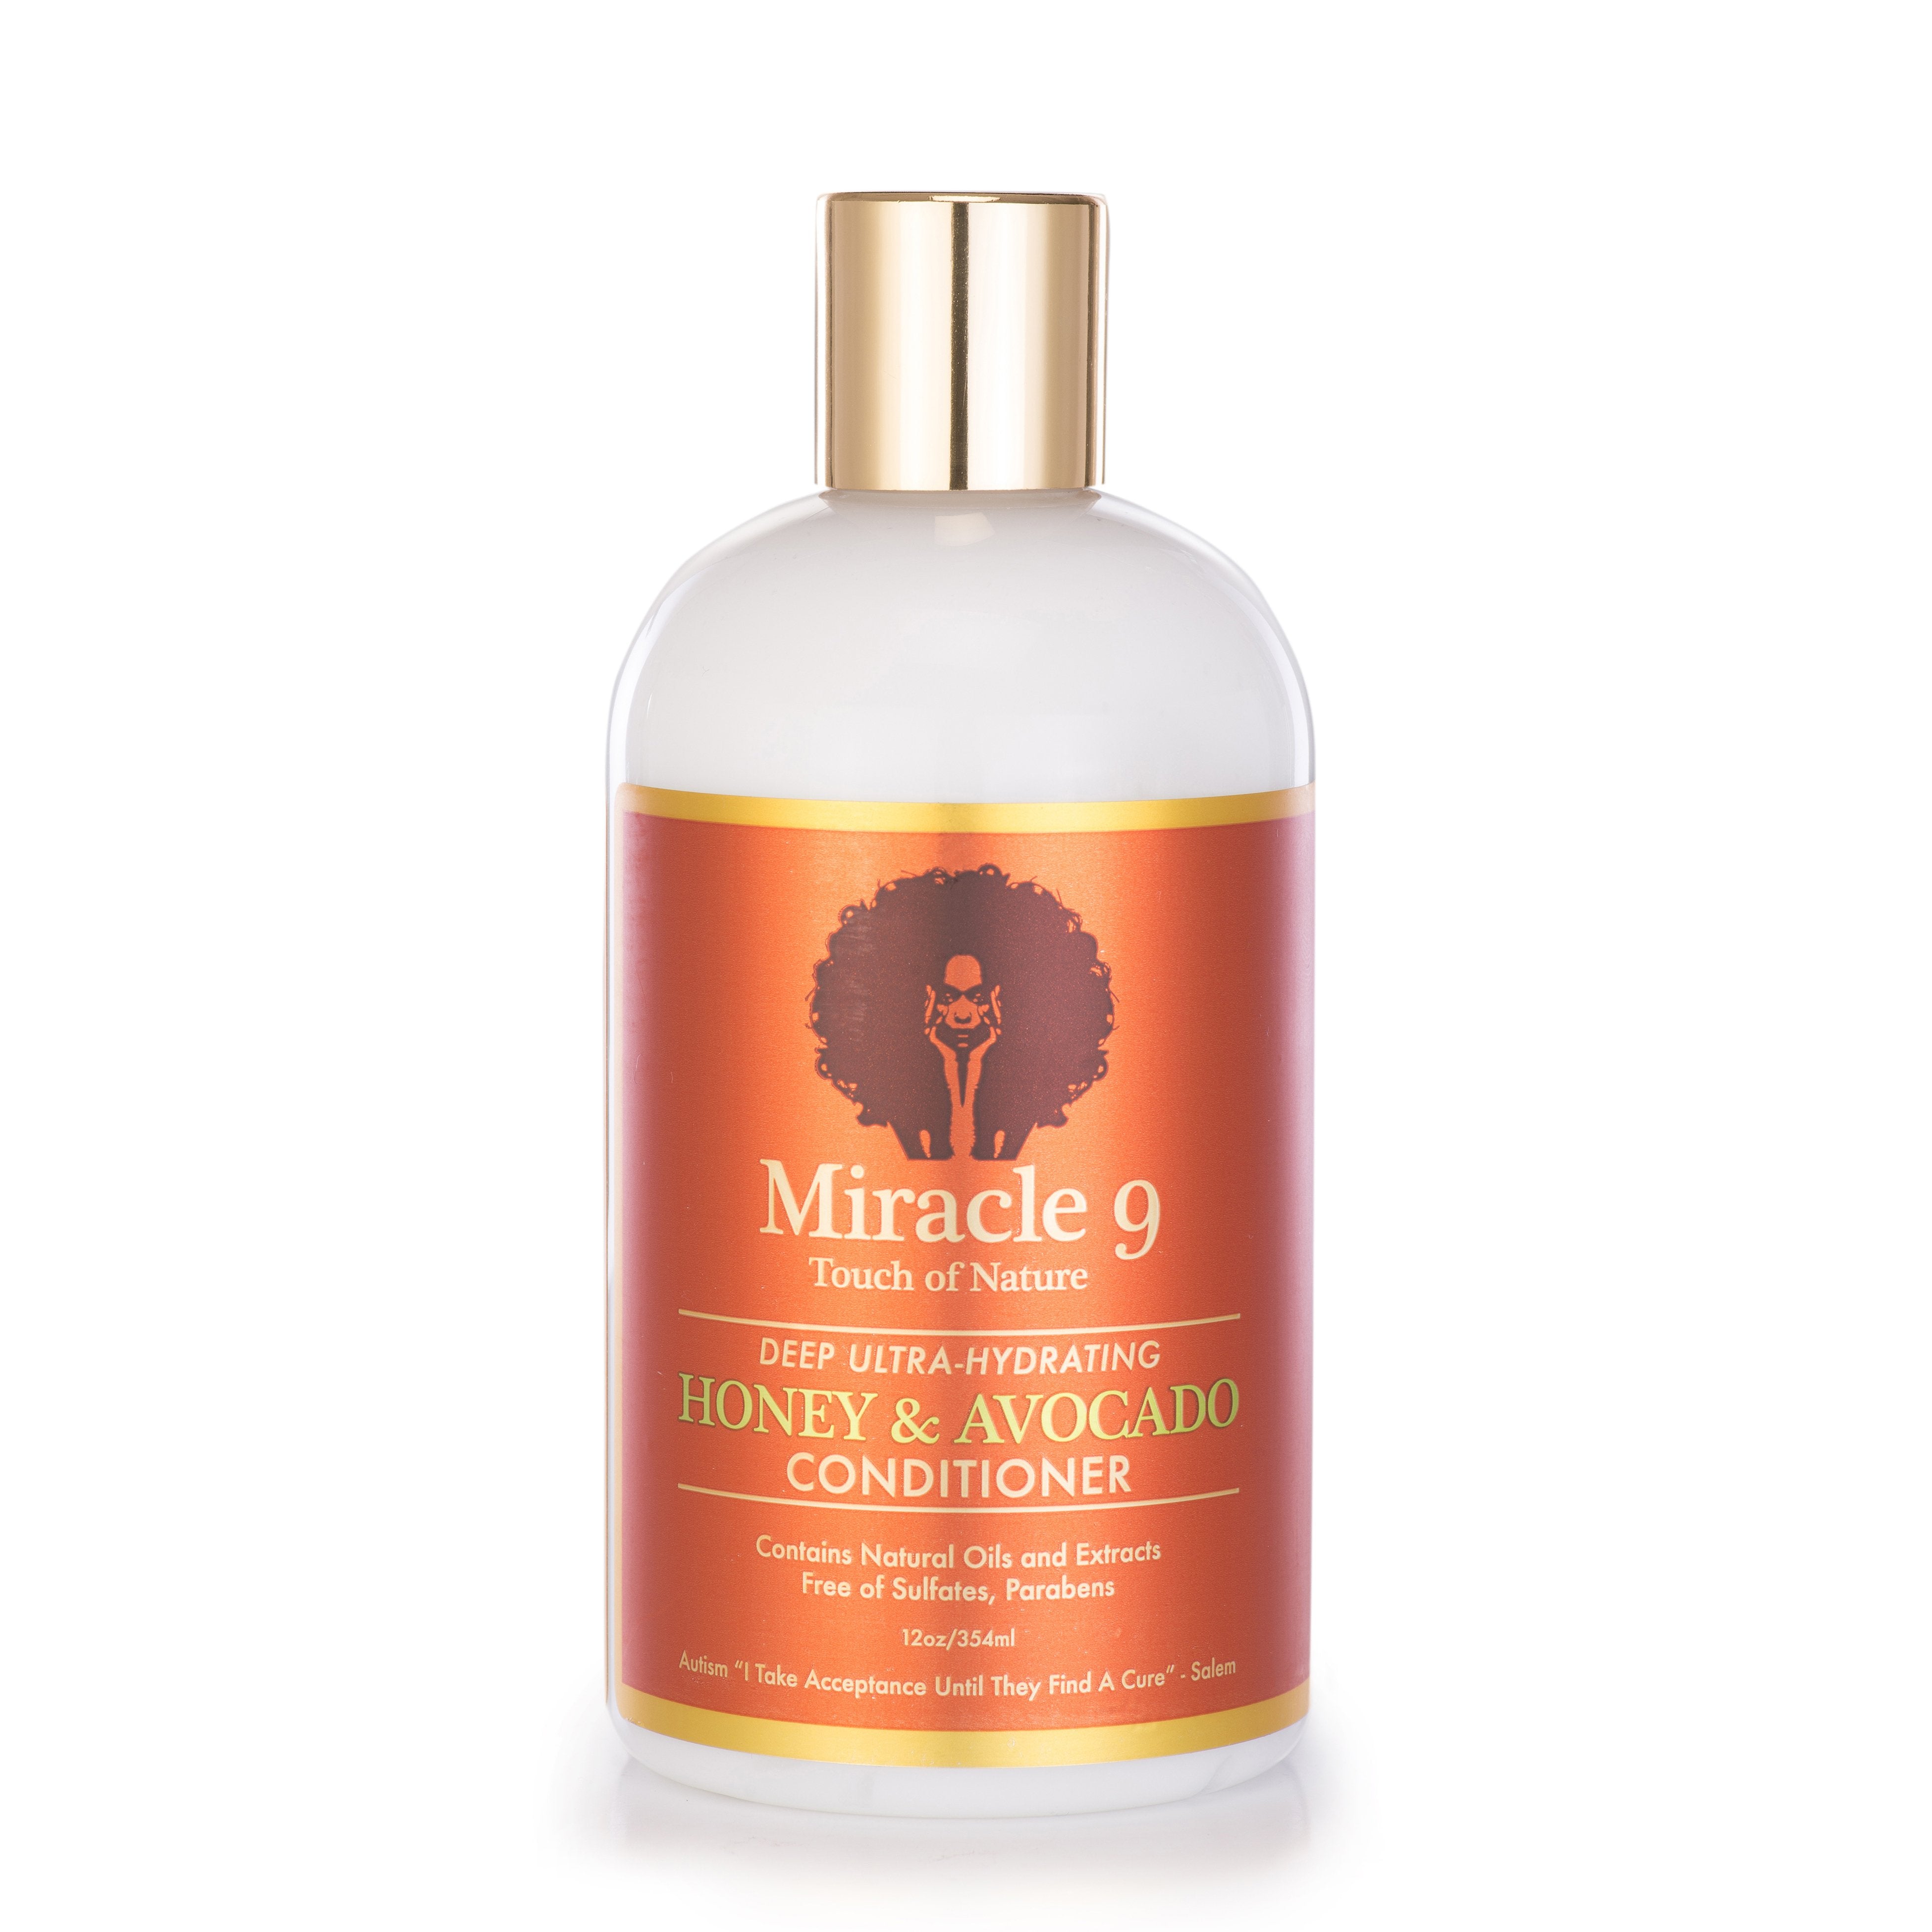 4th Ave Market: Miracle9 Deep Ultra-hydrating Honey & Avocado Conditioner